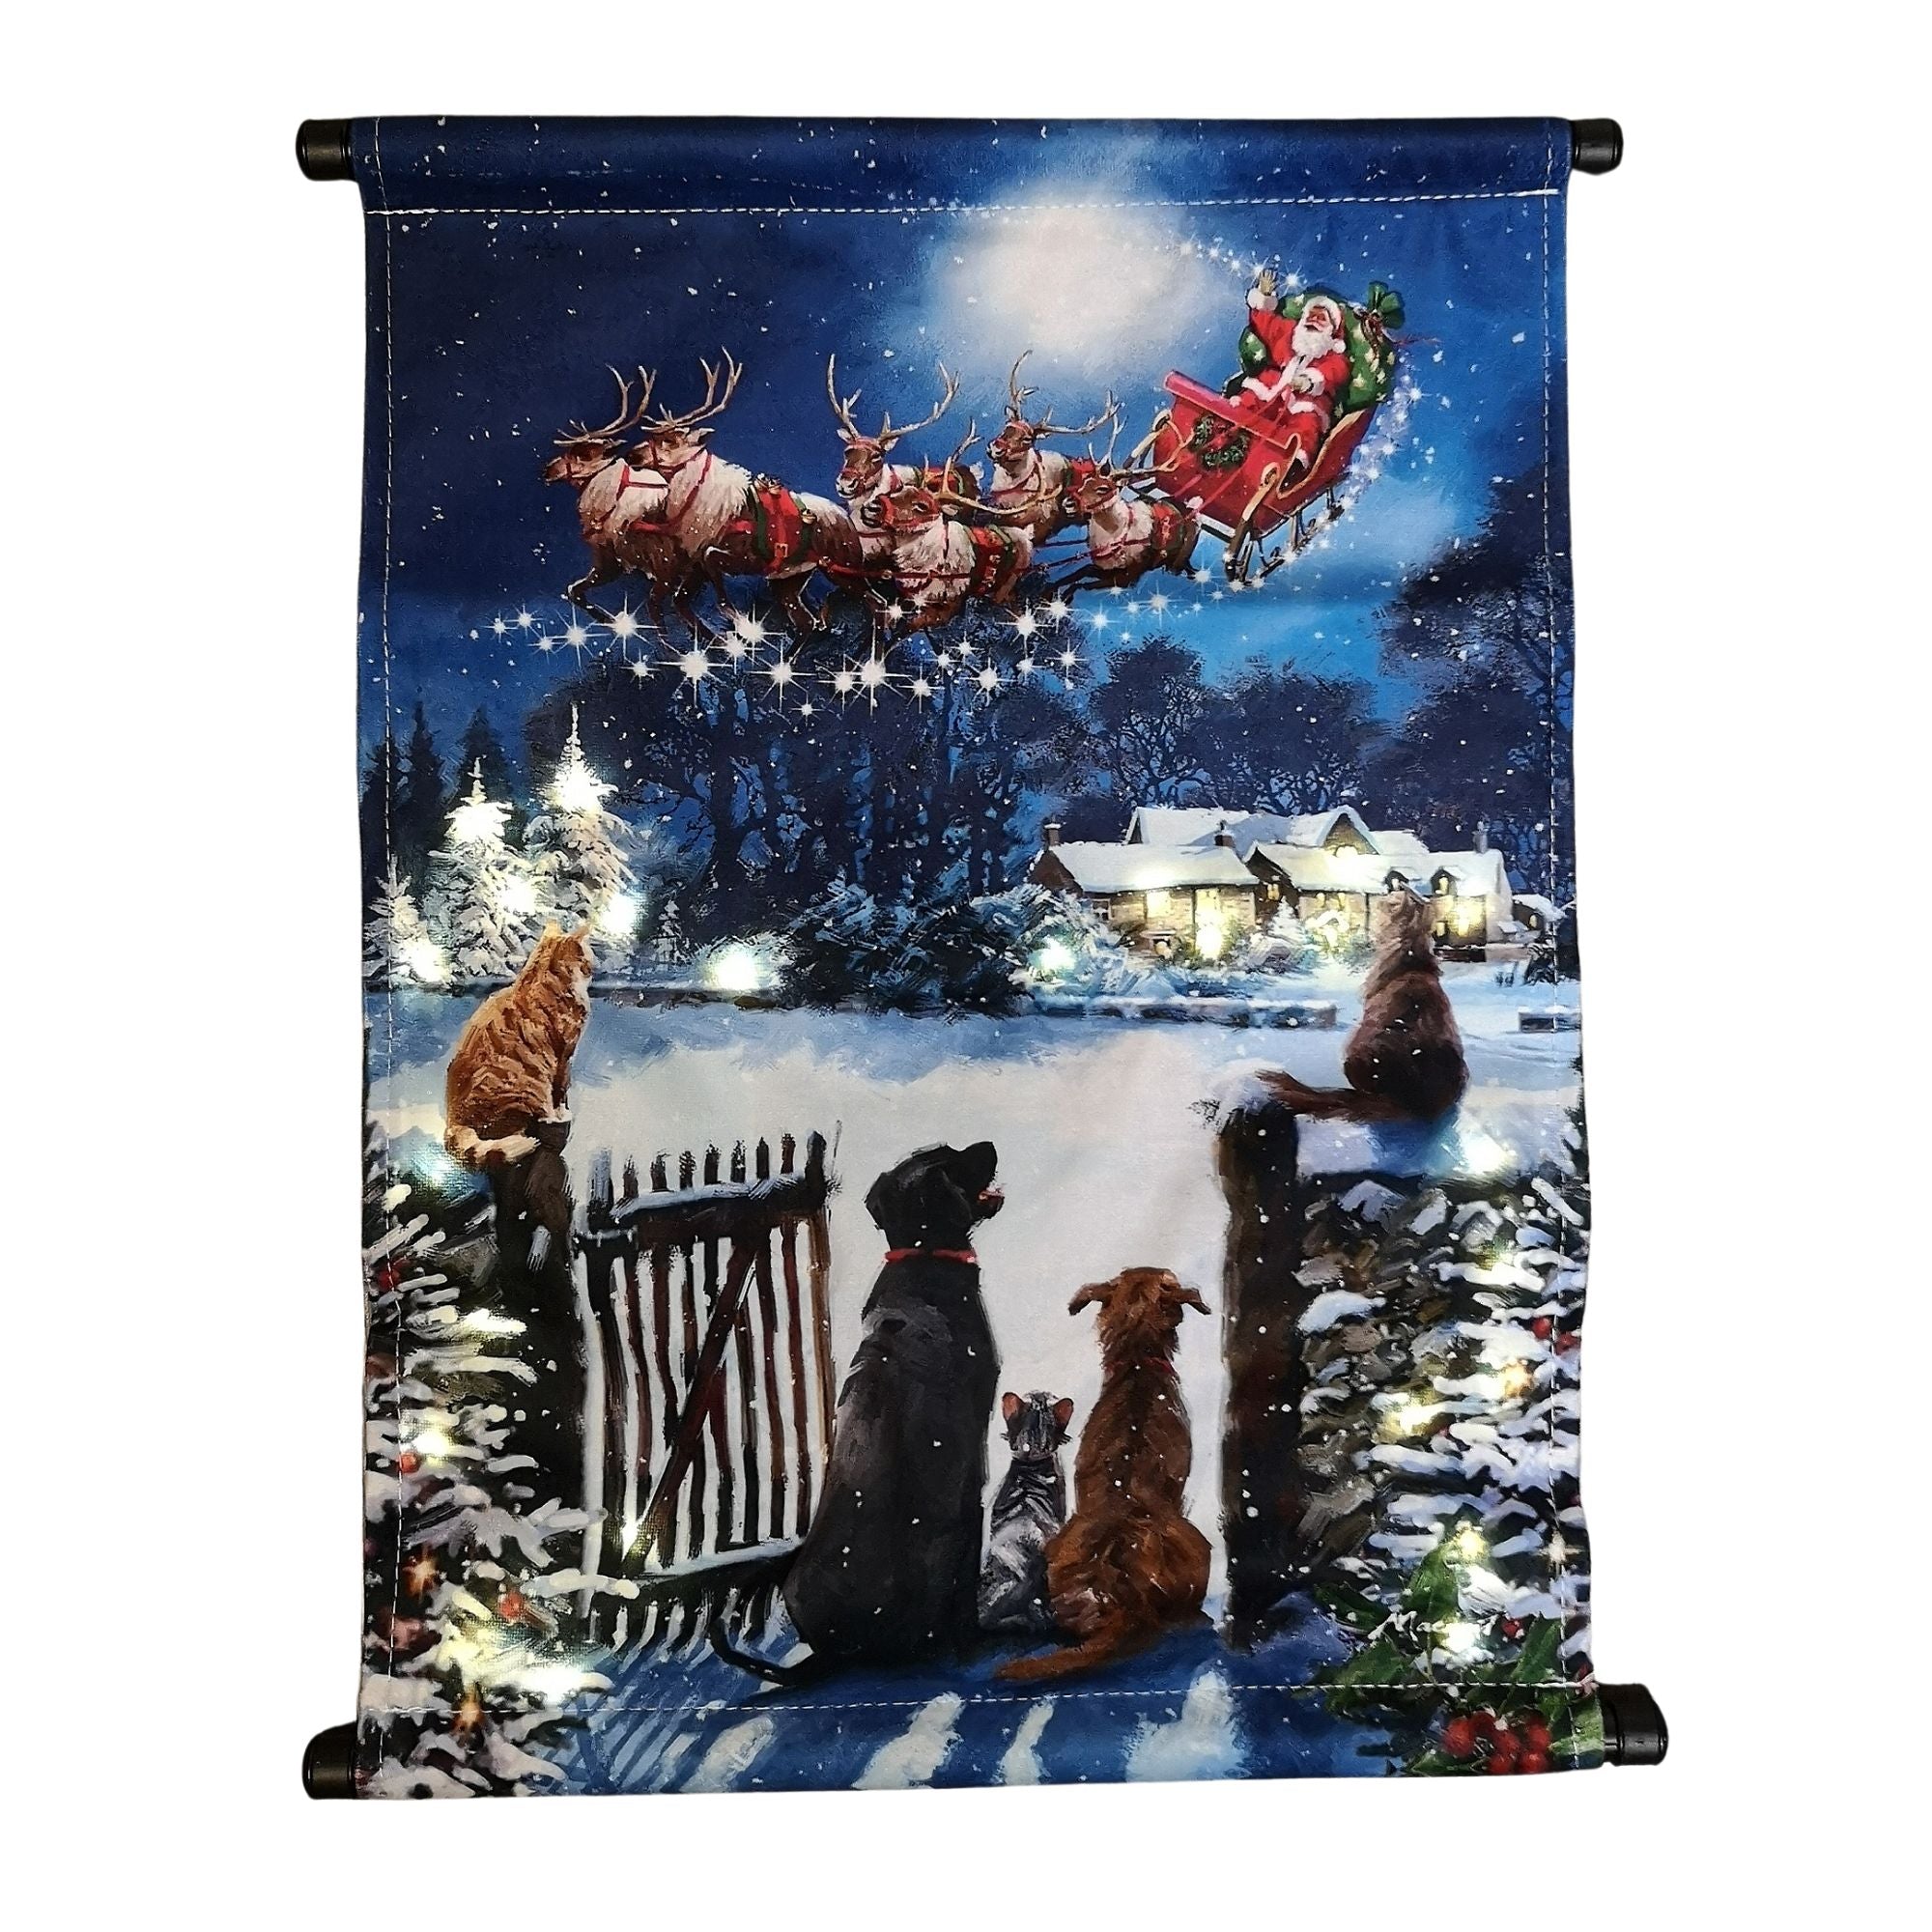 Battery Operated 47cm x 38cm Light up Cats and Dogs Snowy Scene Christmas Hanging Wall Art